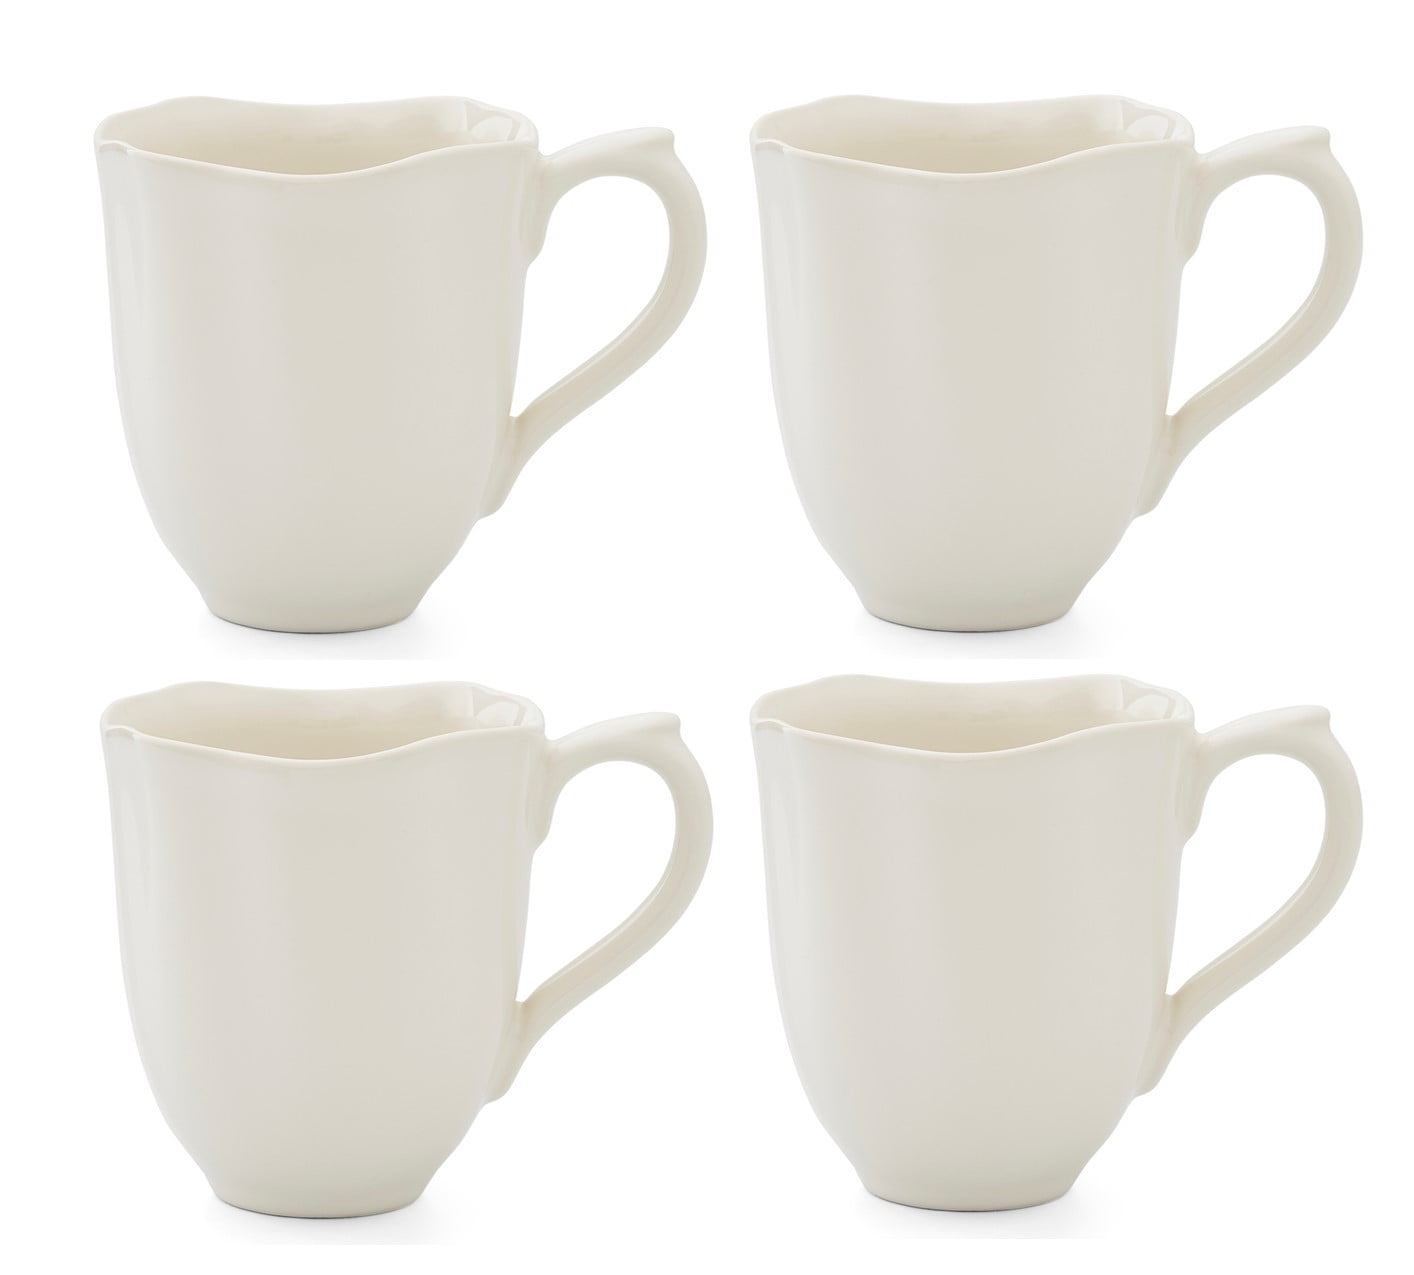 The Pioneer Woman Novelty Gingham 16-oz Mugs, Set of 4